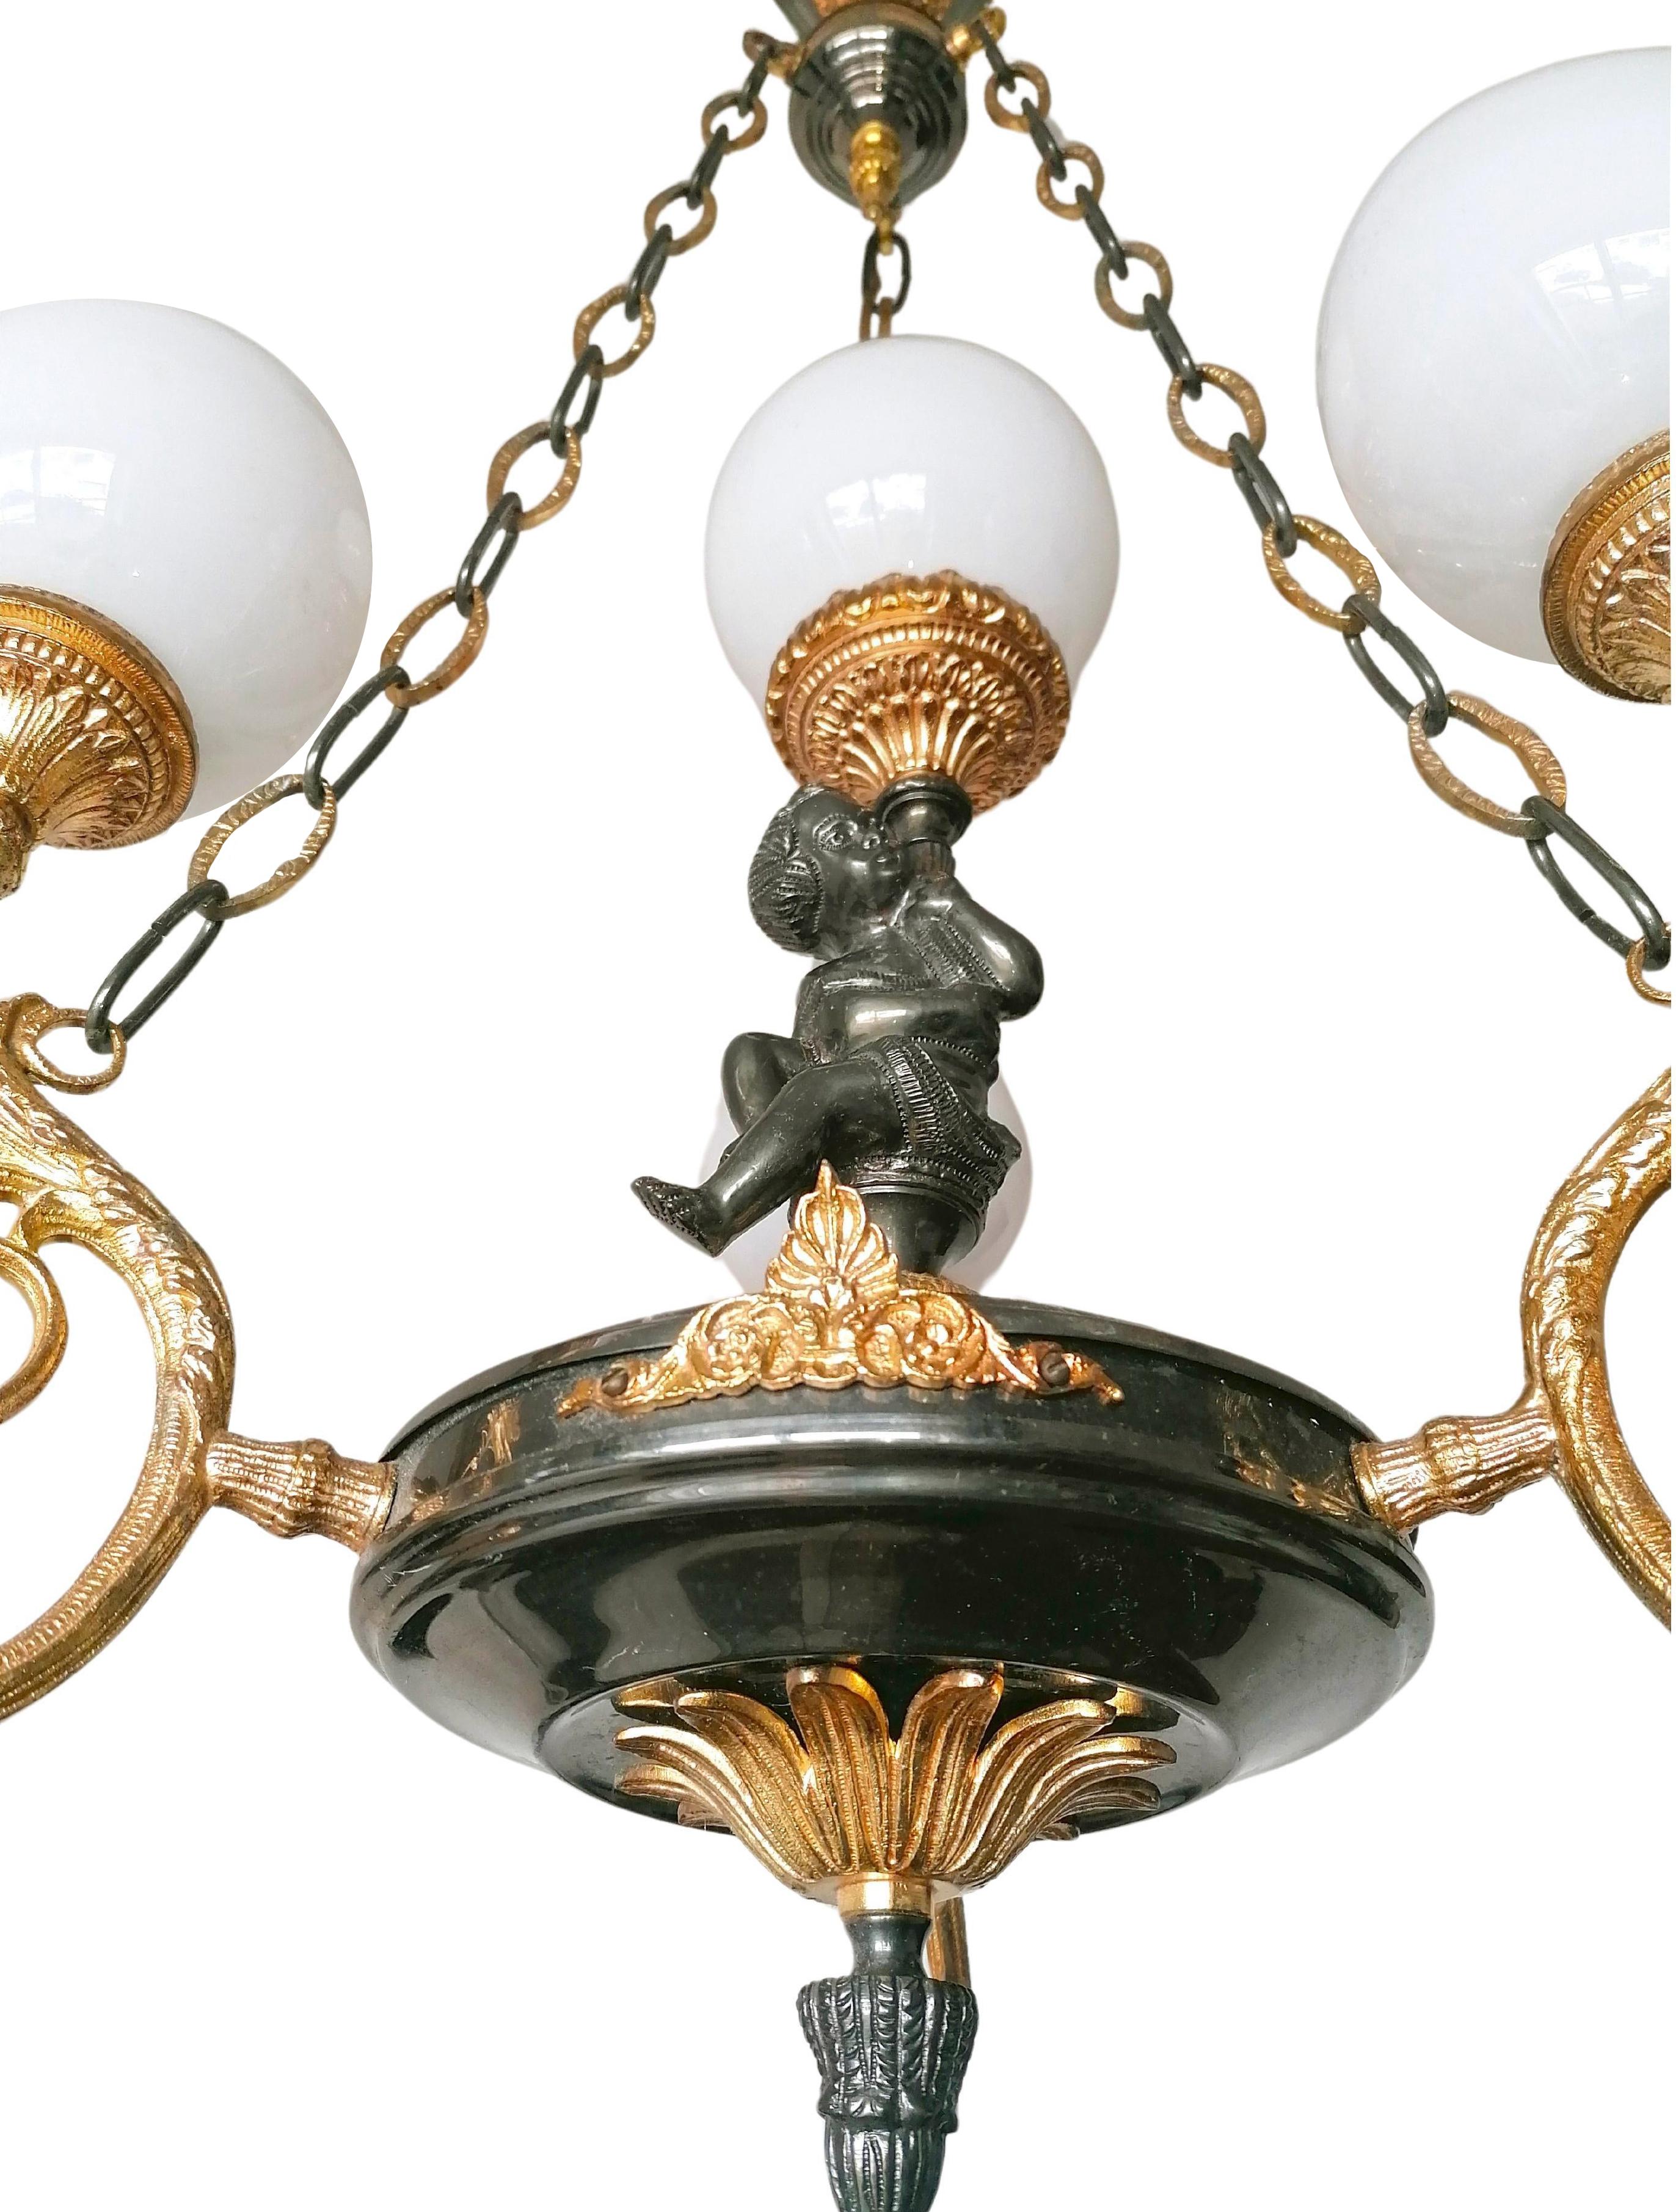 Art Nouveau French Empire Neoclassical Cherub Putti Patinated & Gilt Solid Bronze Chandelier For Sale